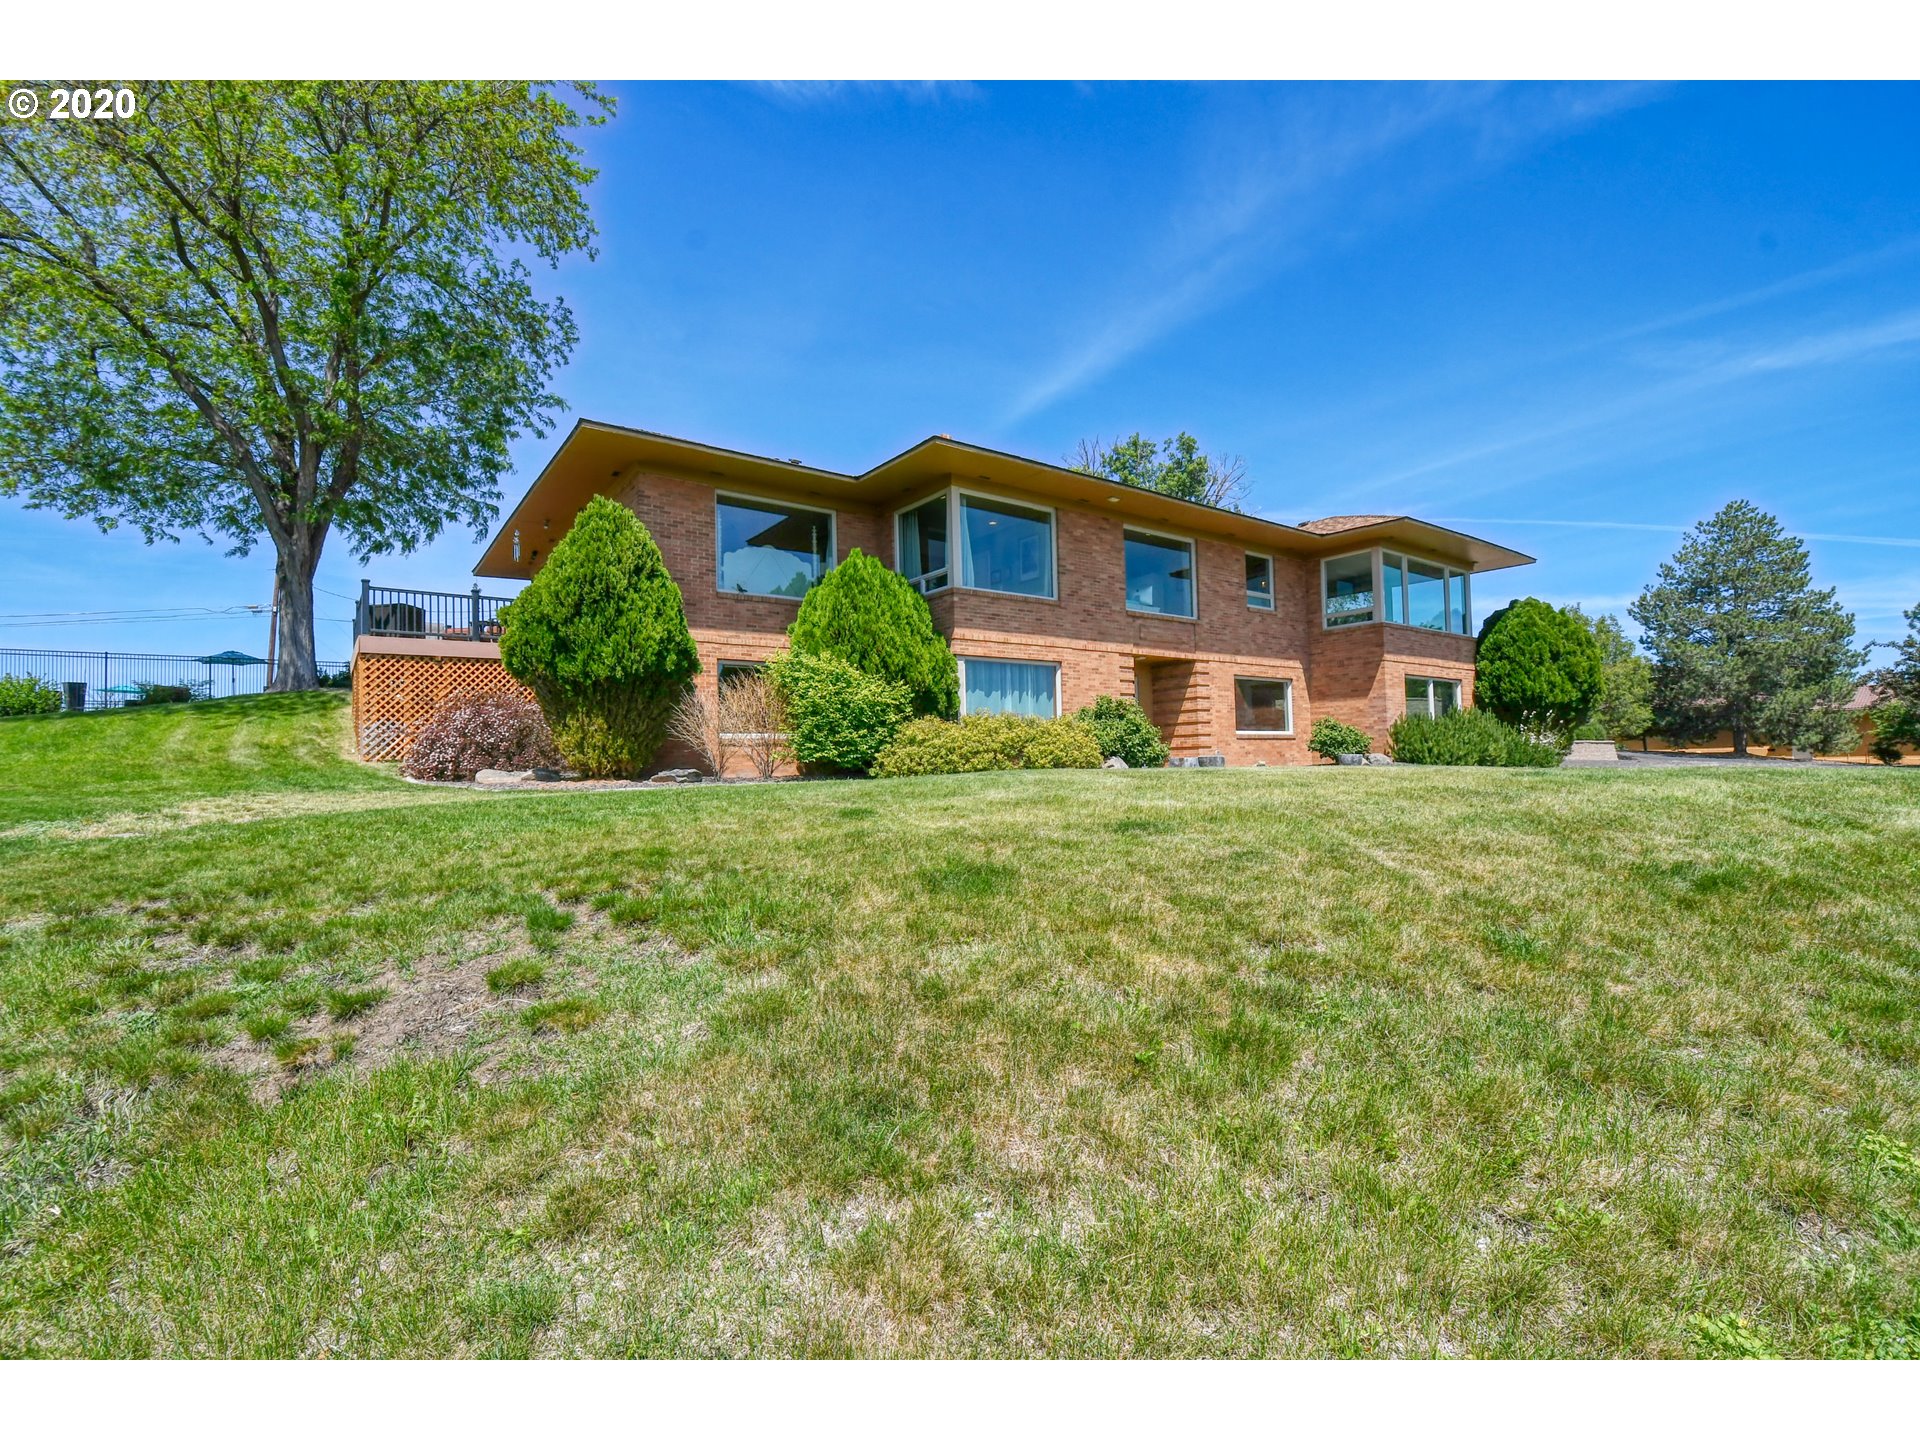 215 NW JOHNS LN (1 of 32)